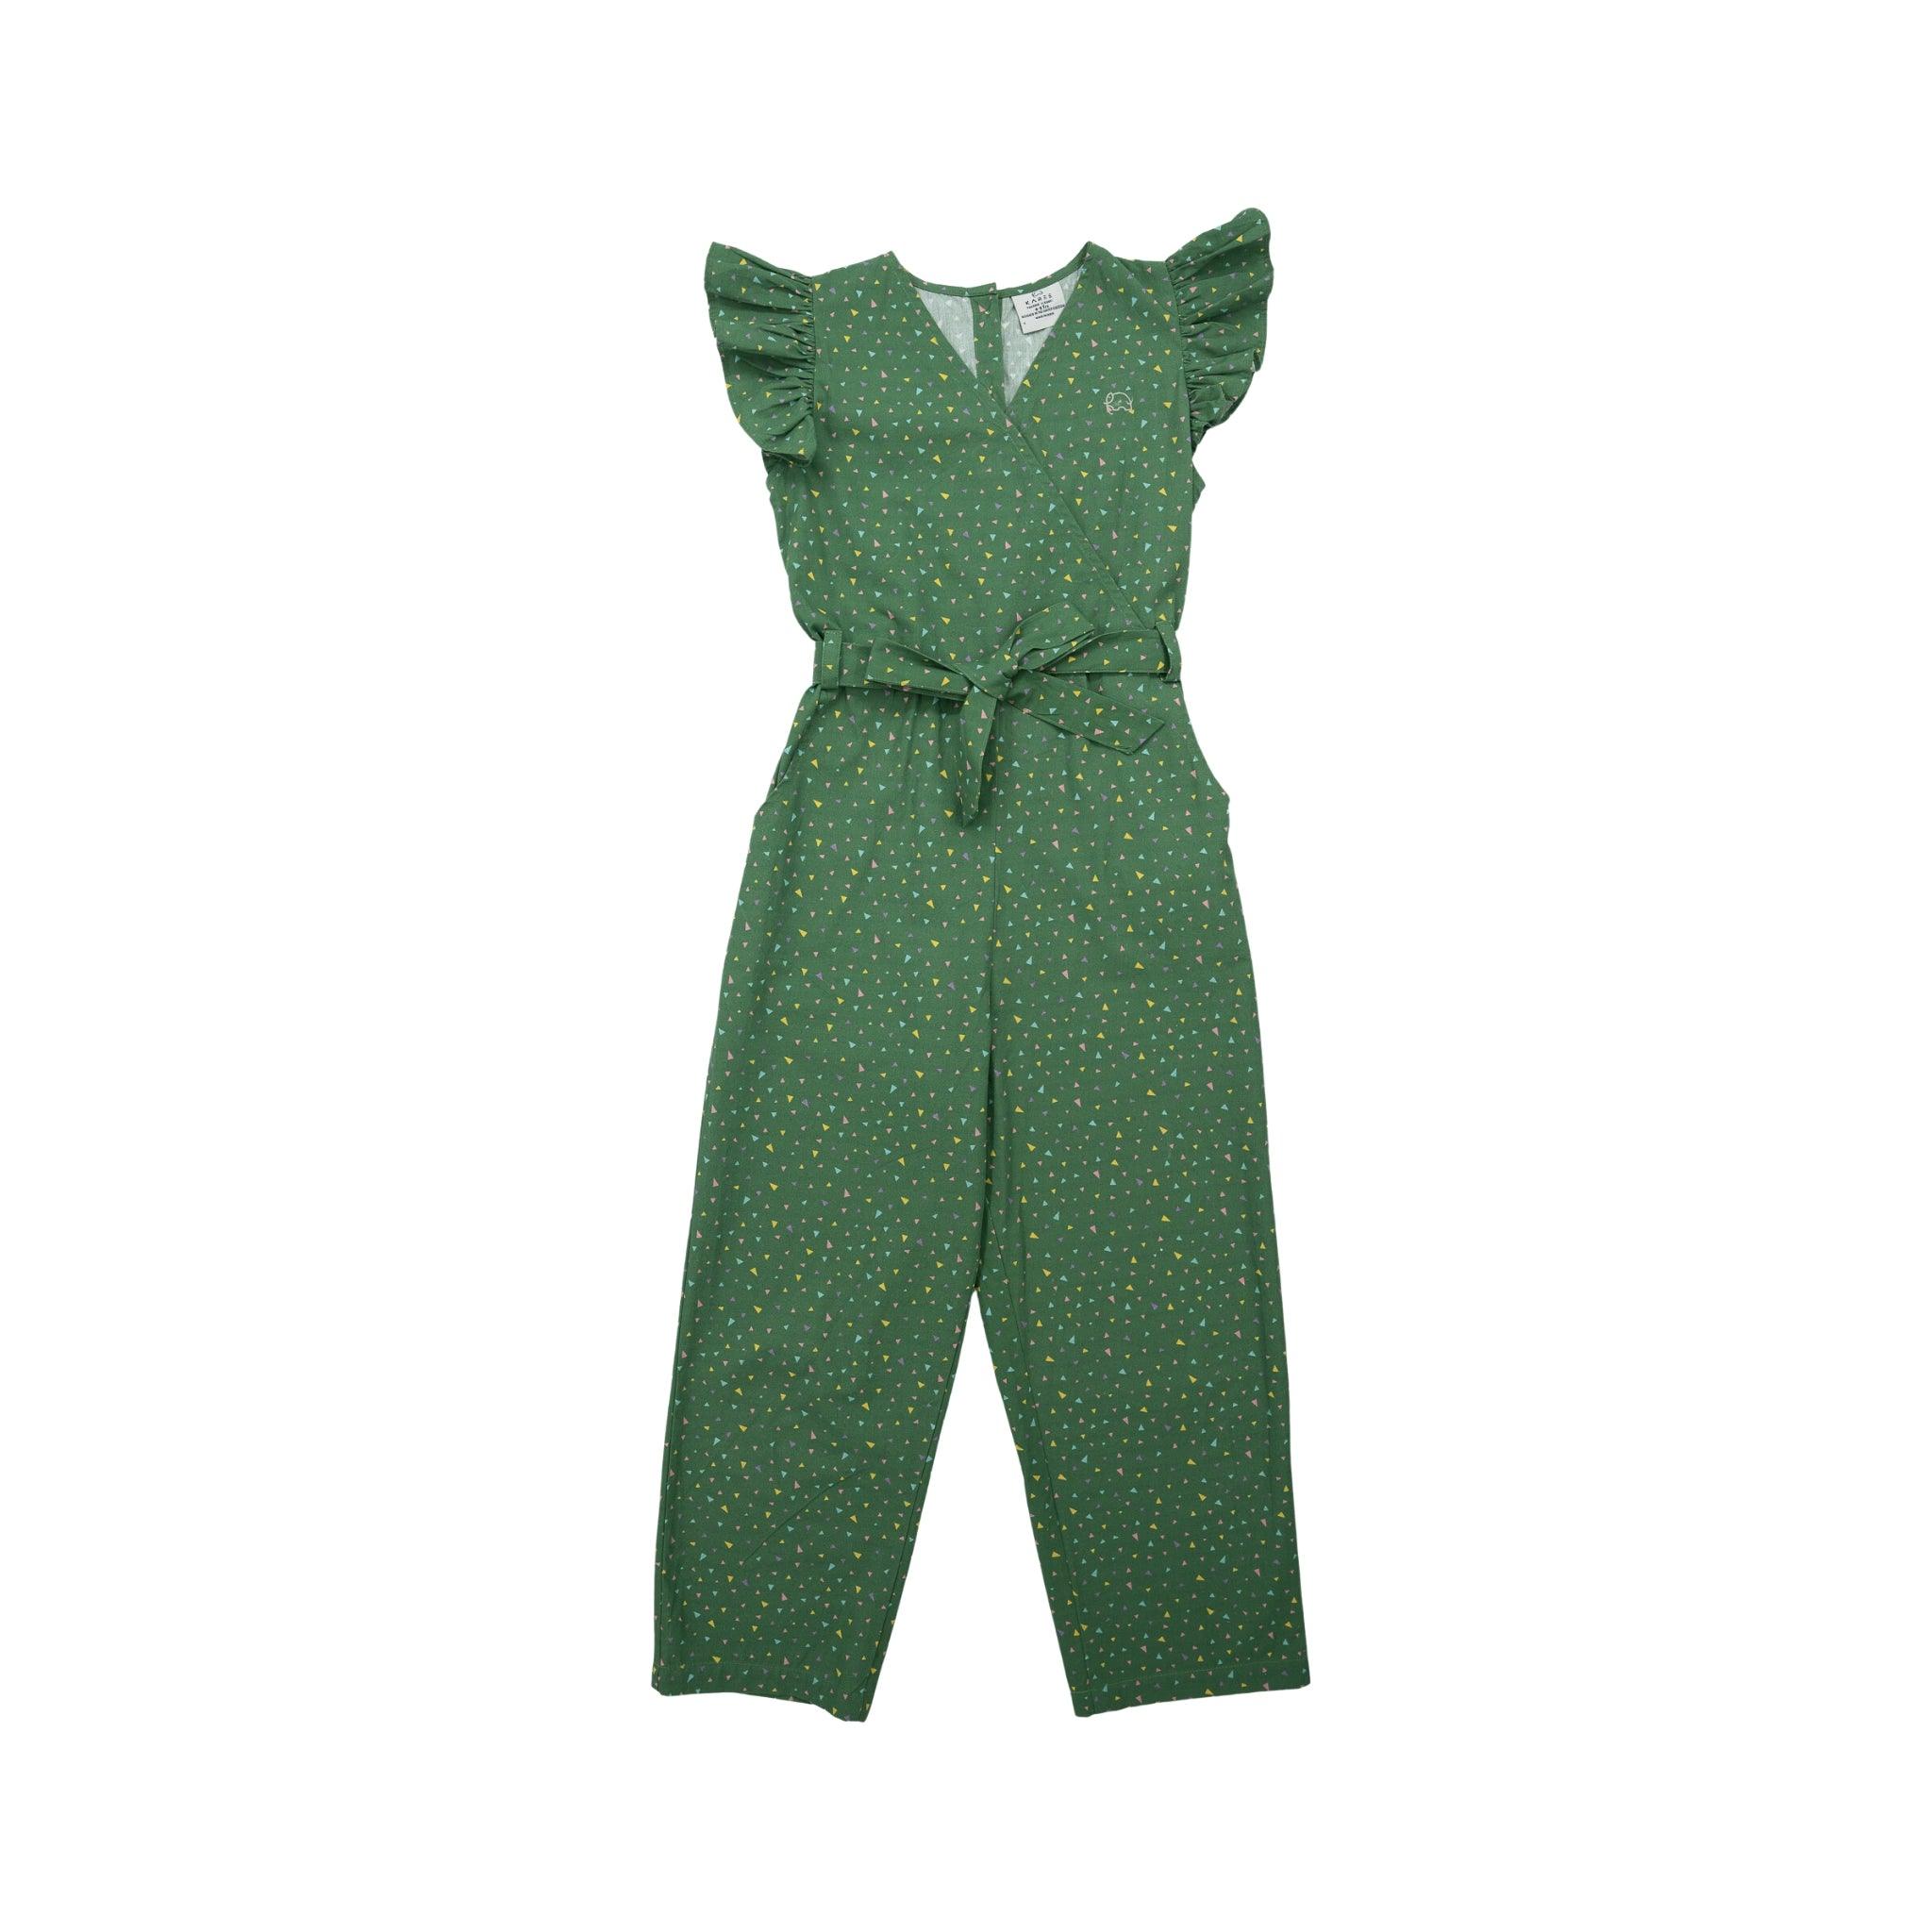 Karee's Green Confetti Cotton V-Neck Jumpsuit for Kids with polka dots, featuring ruffled sleeves and a waist tie, displayed against a white background.